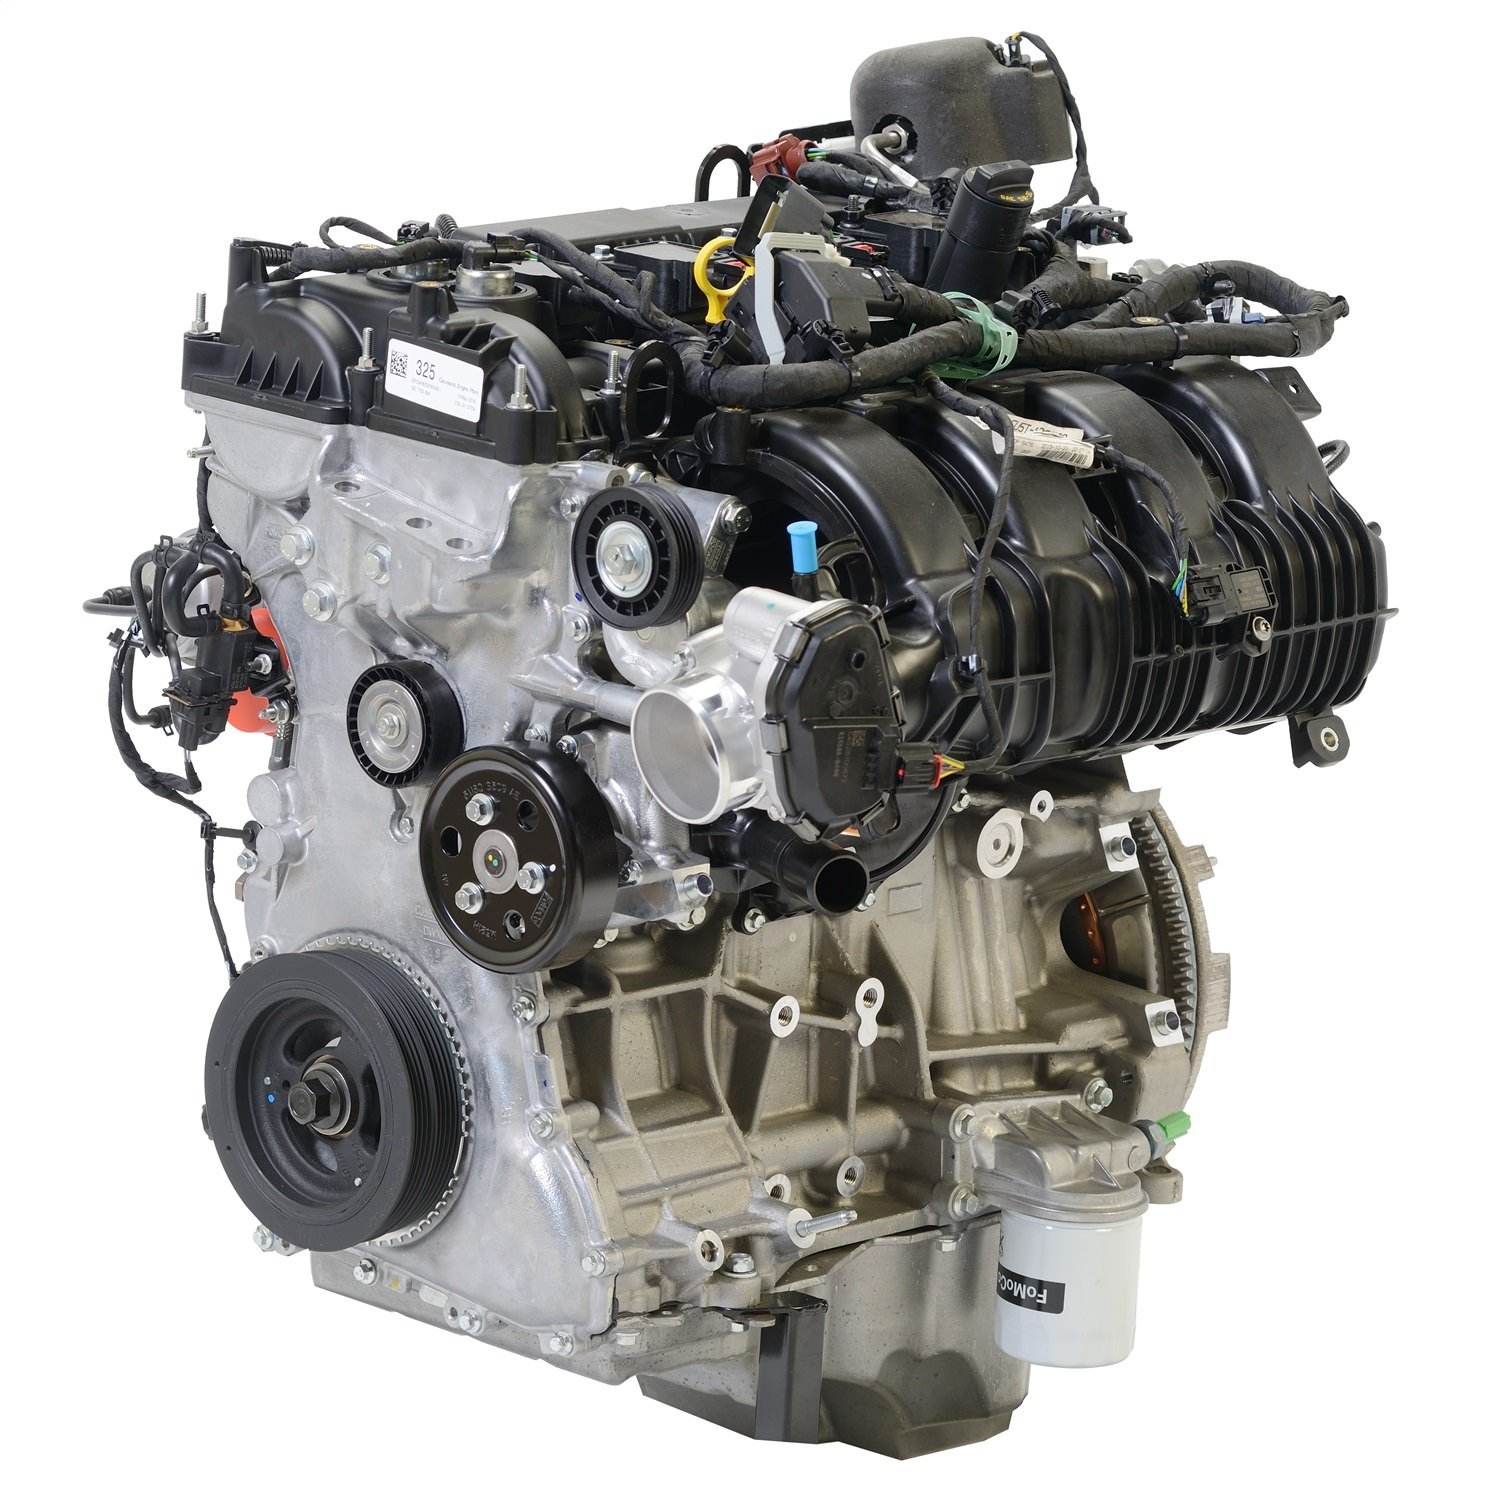 2.3L MUSTANG CRATE ENGINE